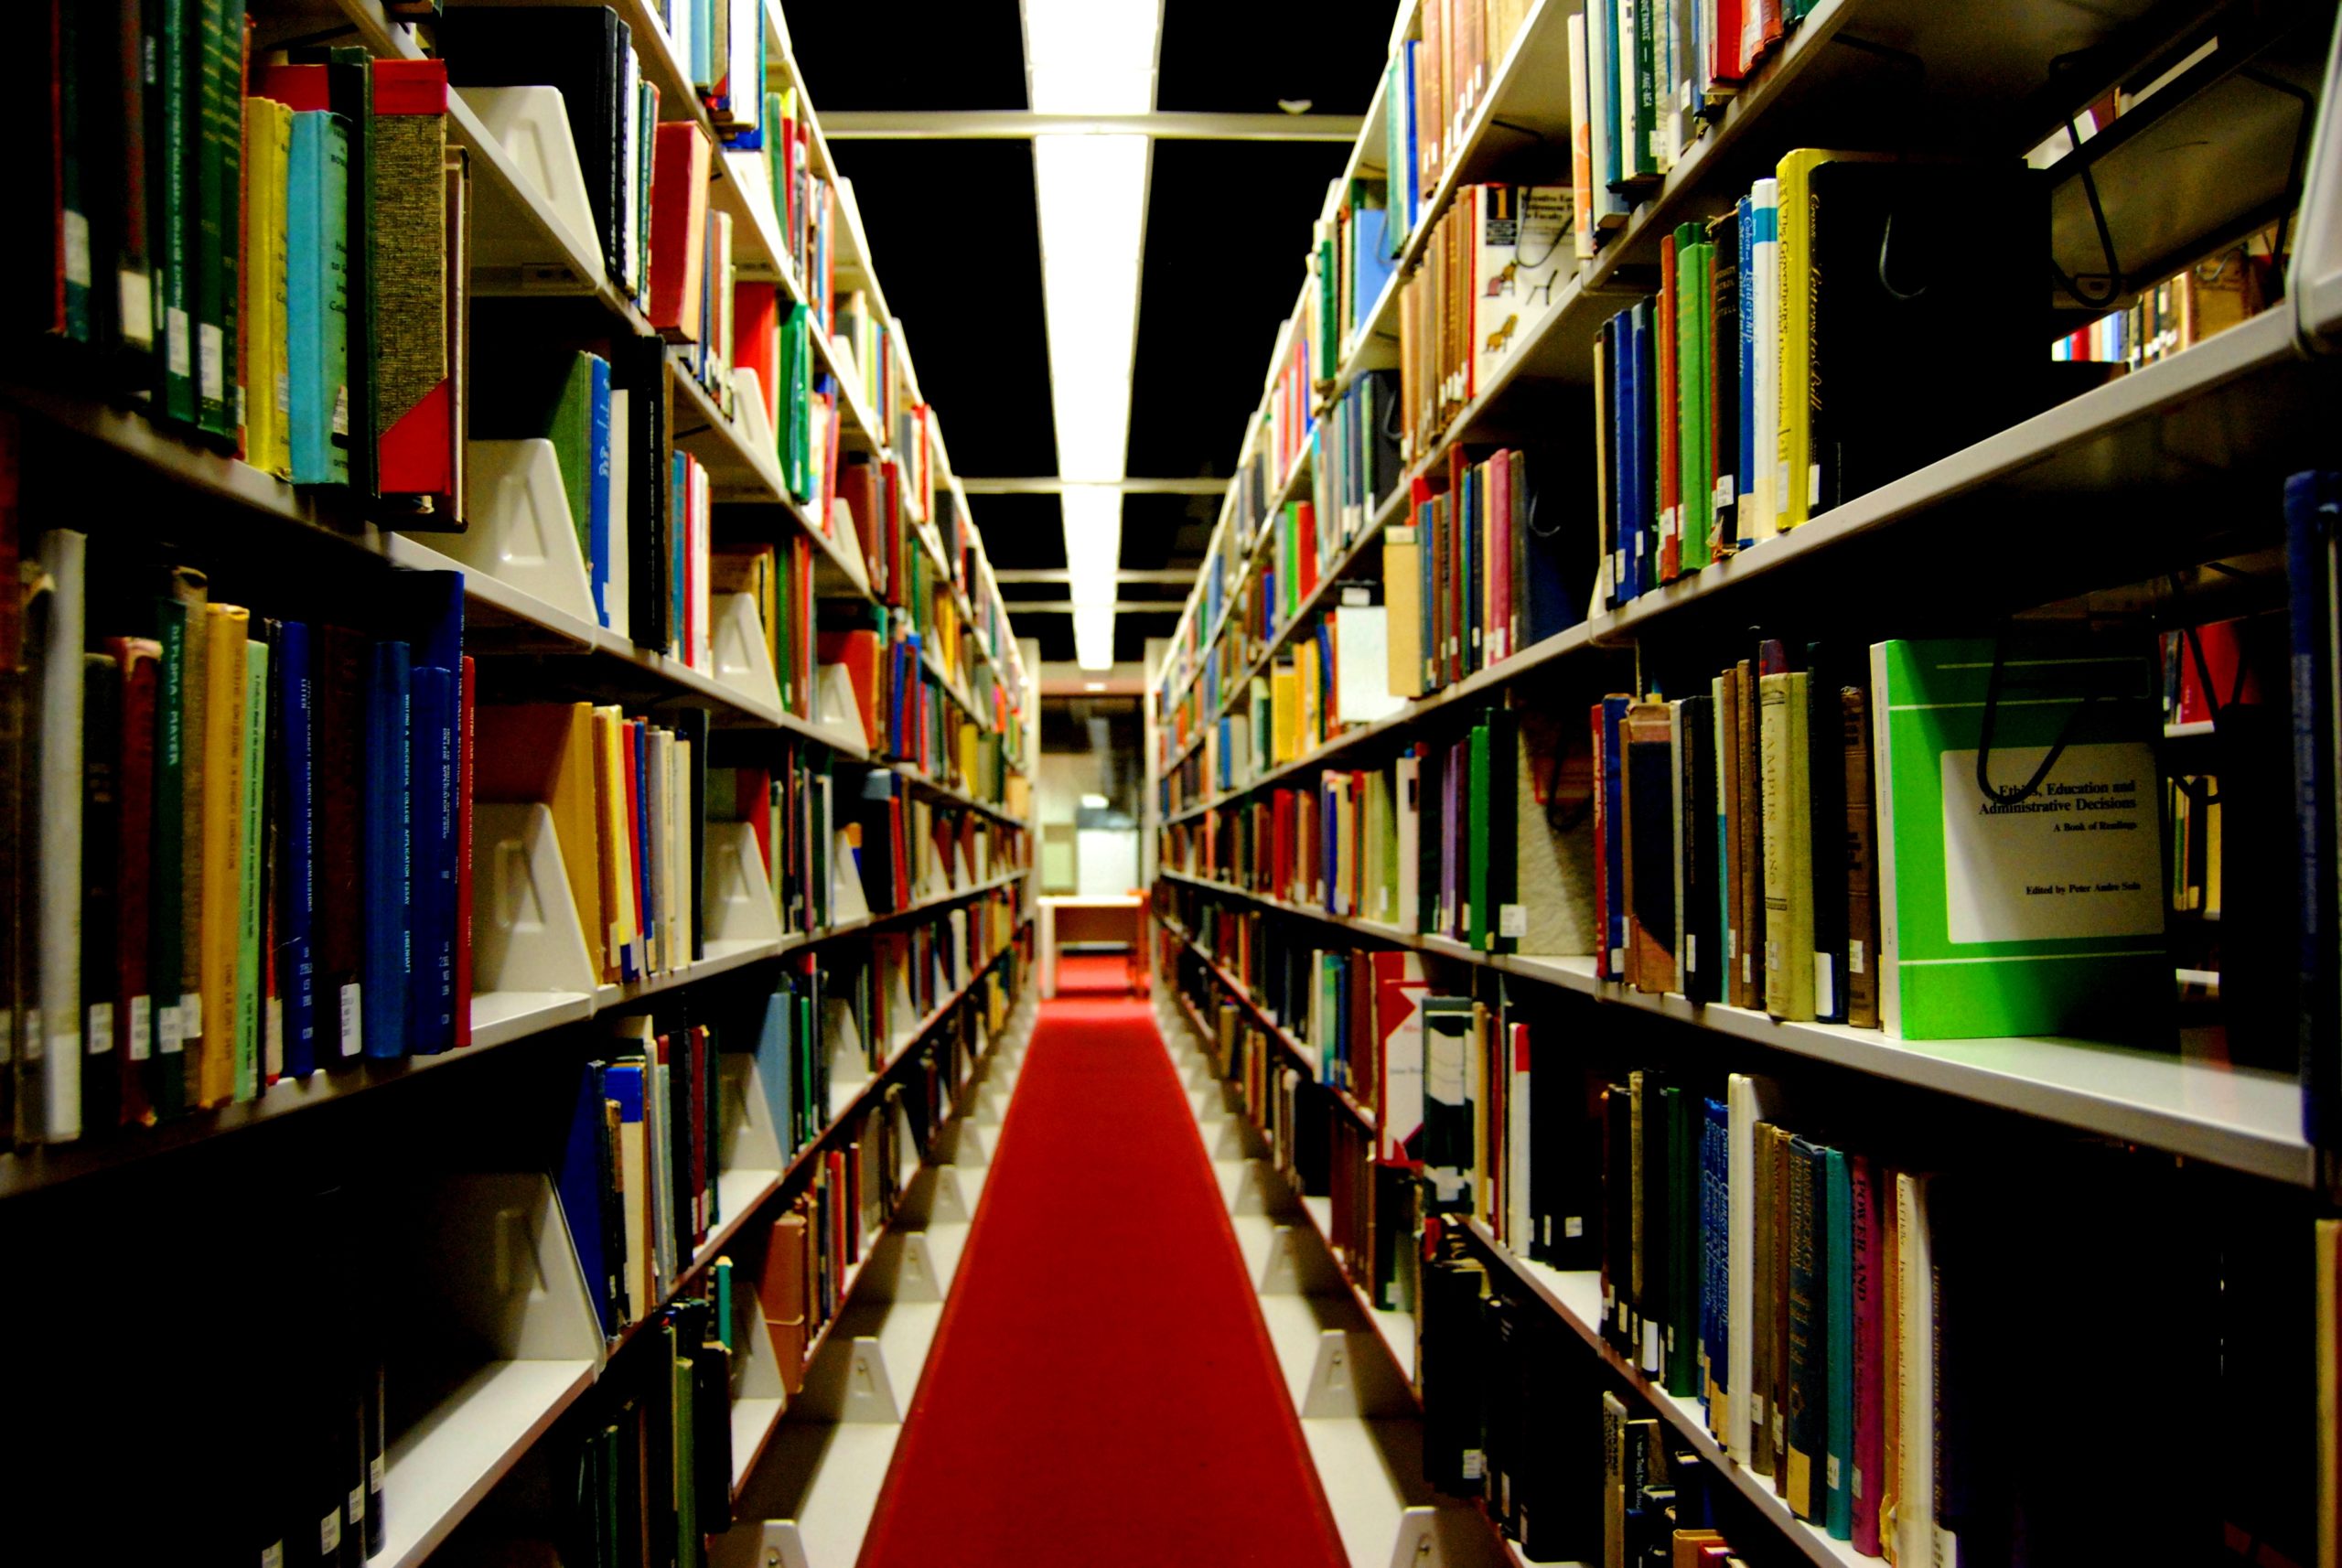 A long library stack shows rows of books on both left and right.